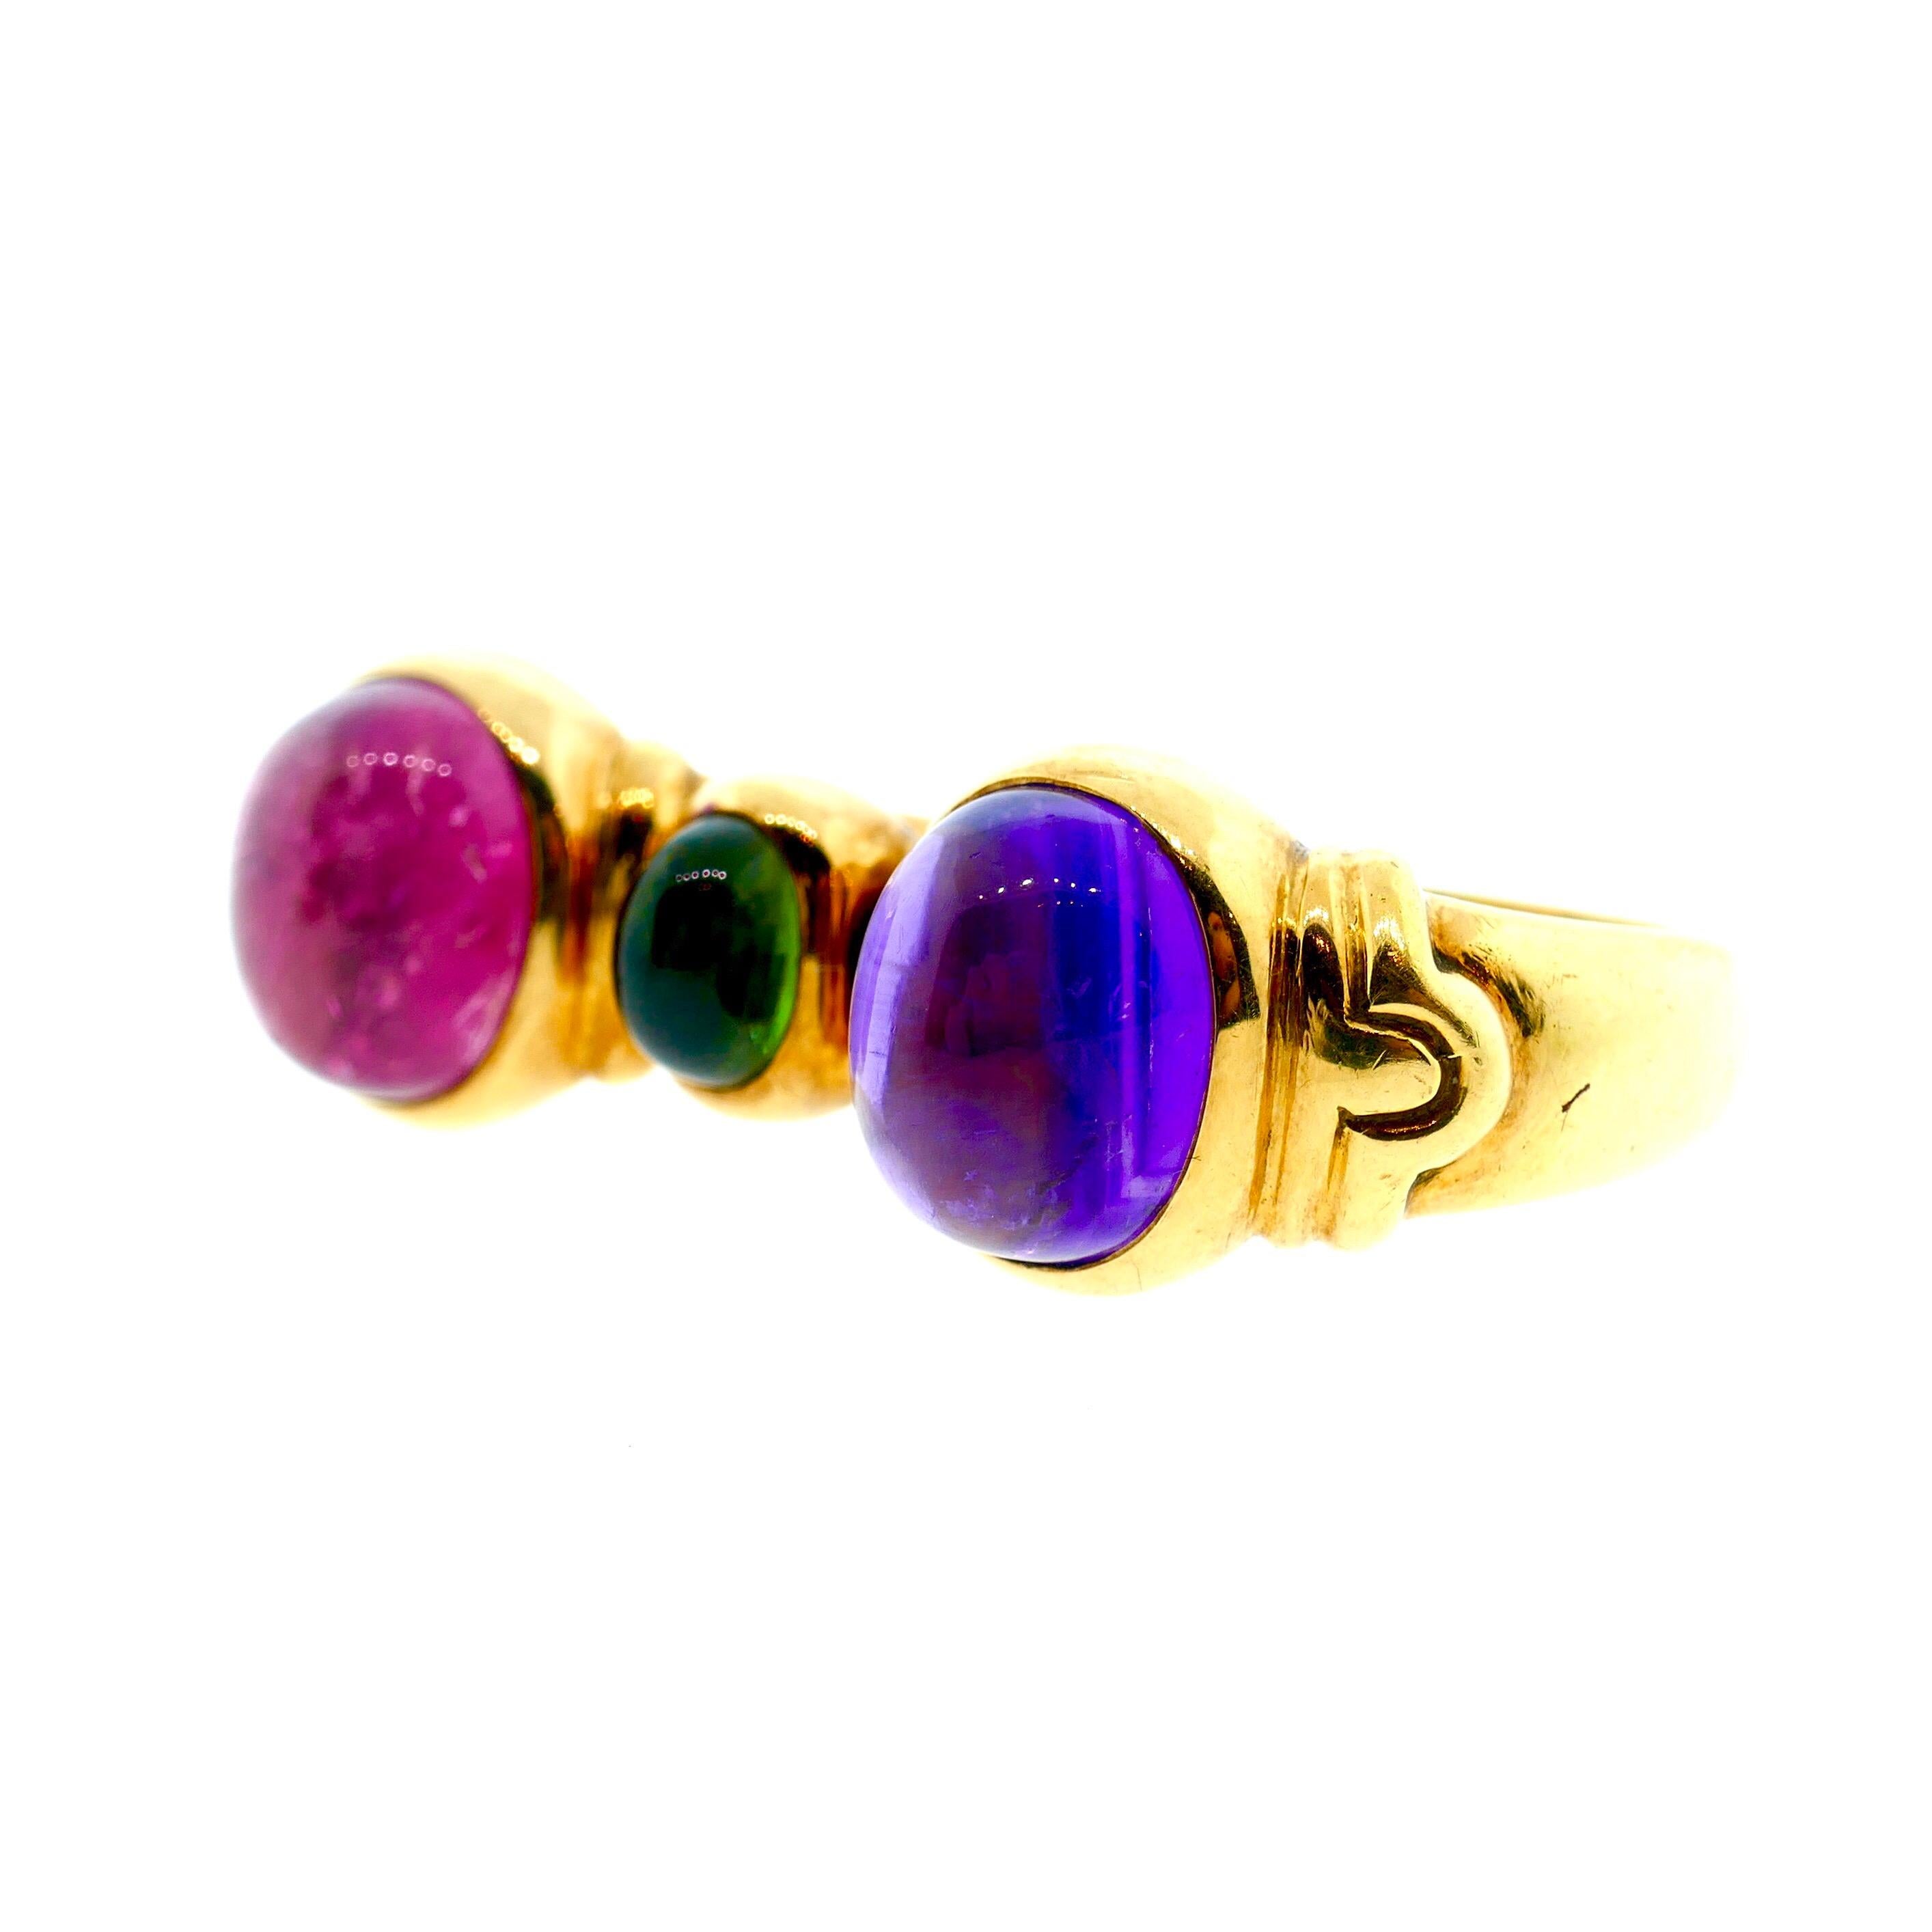 Bvlgari 18k Gold, Amethyst, Peridot, Tourmaline Two Finger Ring

This is a very stylish and rare Bvlgari two finger ring. It features intense colored amethyst, peridot, and tourmaline. 

Size: 6.75 (US) & 6.25 (US)

Weight: 23 Grams

Signature /